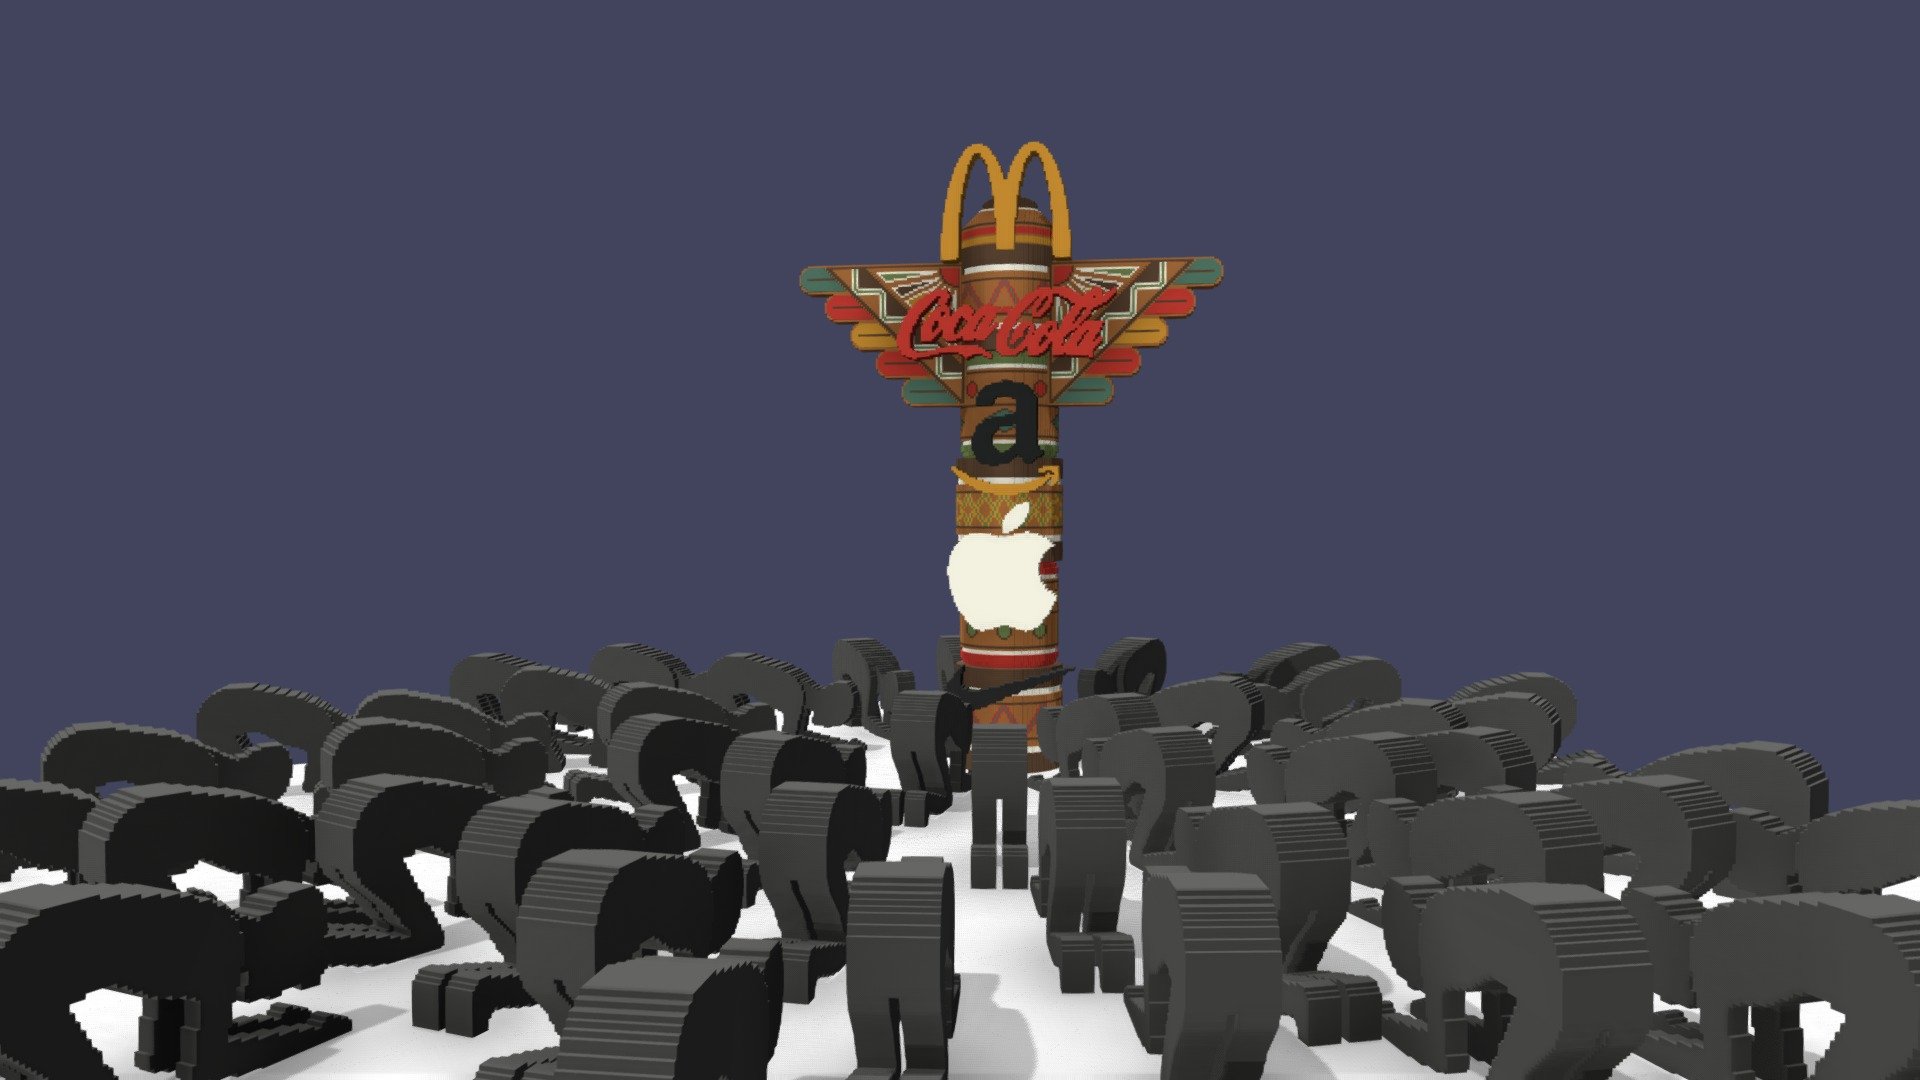 drum Adelaide Detective The Totem - Voxel model - Download Free 3D model by HalfBreath  (@halfbreath) [69a707f]